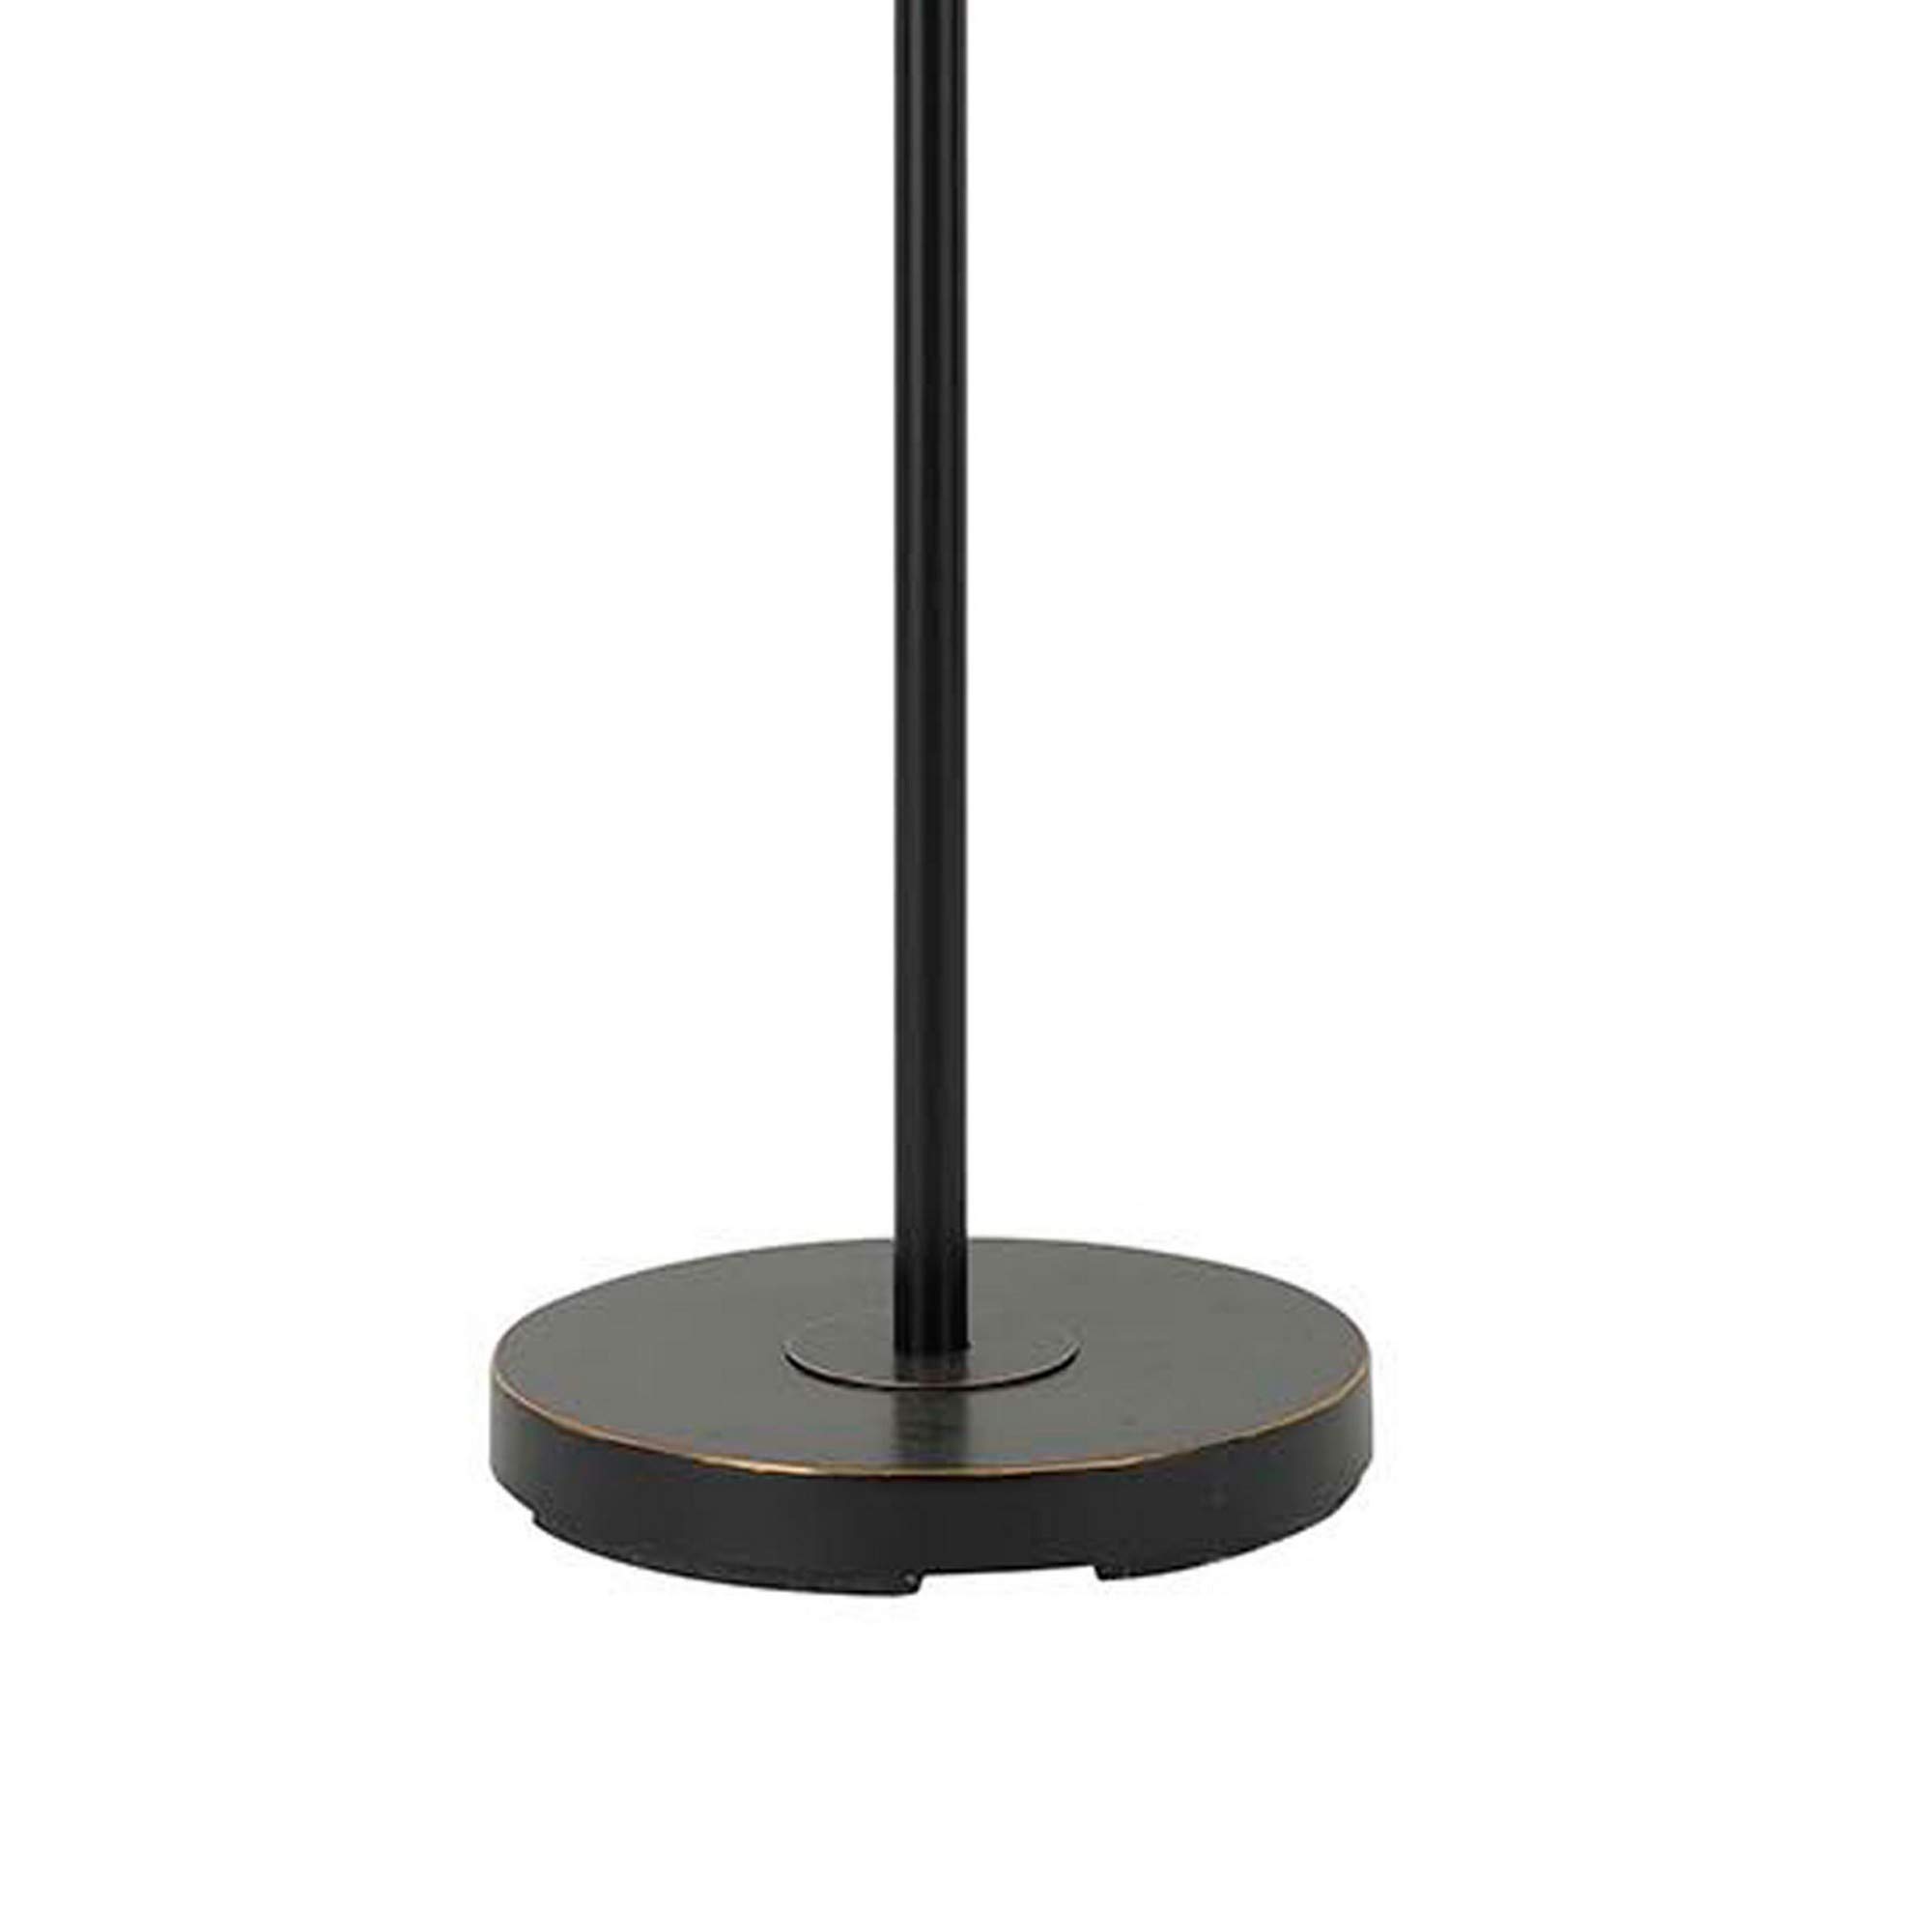 Benjara Metal Body Torchiere Floor Lamp with Attached Reading Light, Black